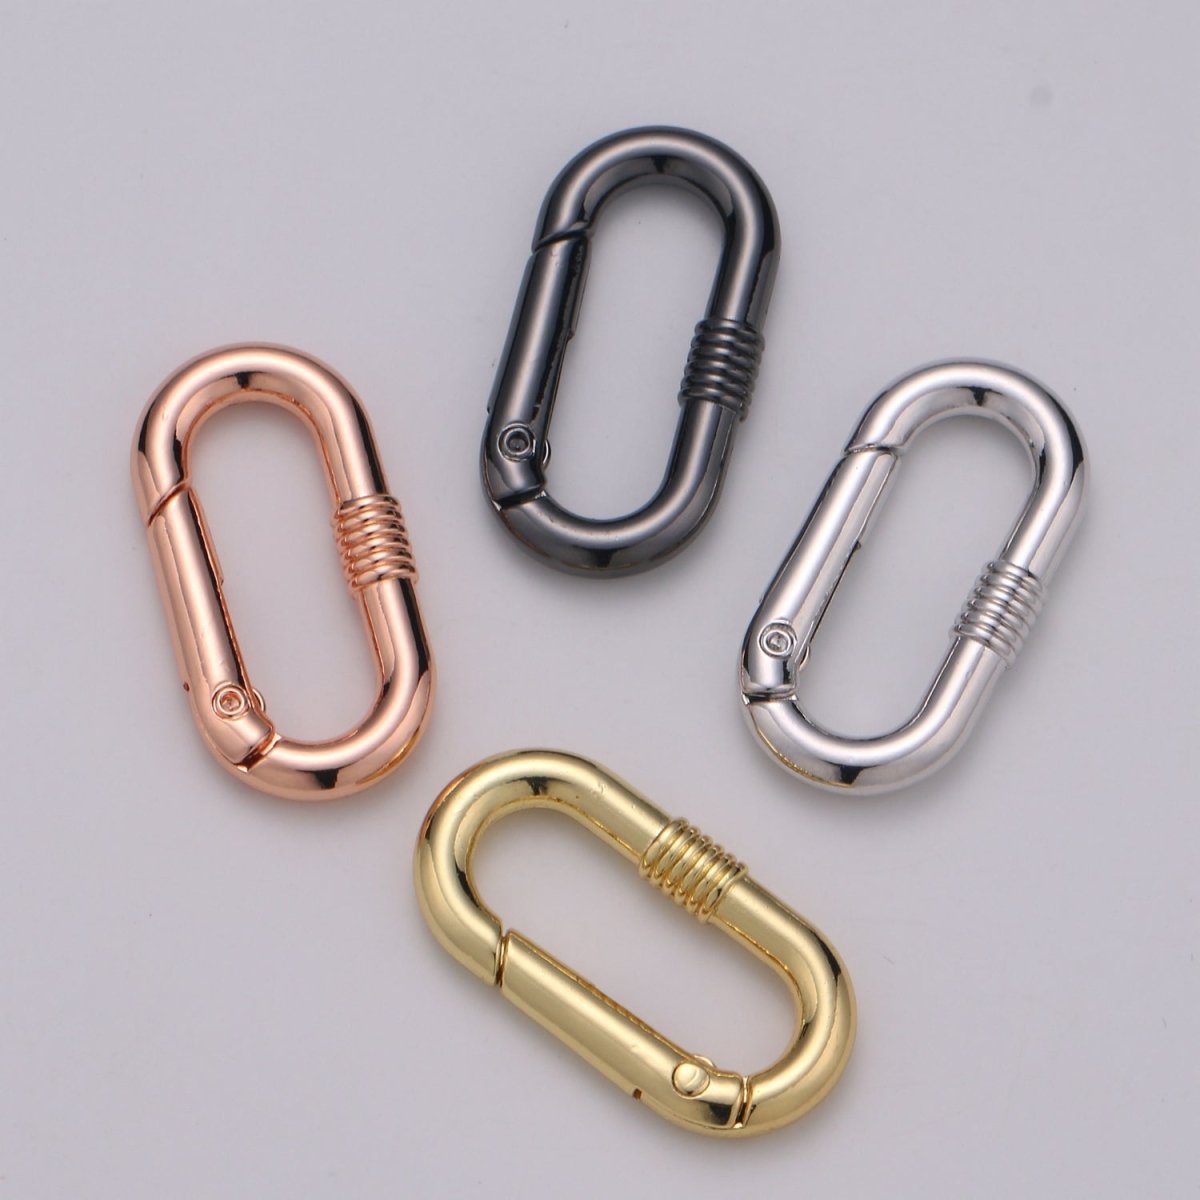 Chunky Gold Spring Gate Ring, Push Gate ring, 17x30mm Oval Ring, Charm Holder 24K Gold Filled Clasp for Link Chain Connector L-024 - L-027 - DLUXCA